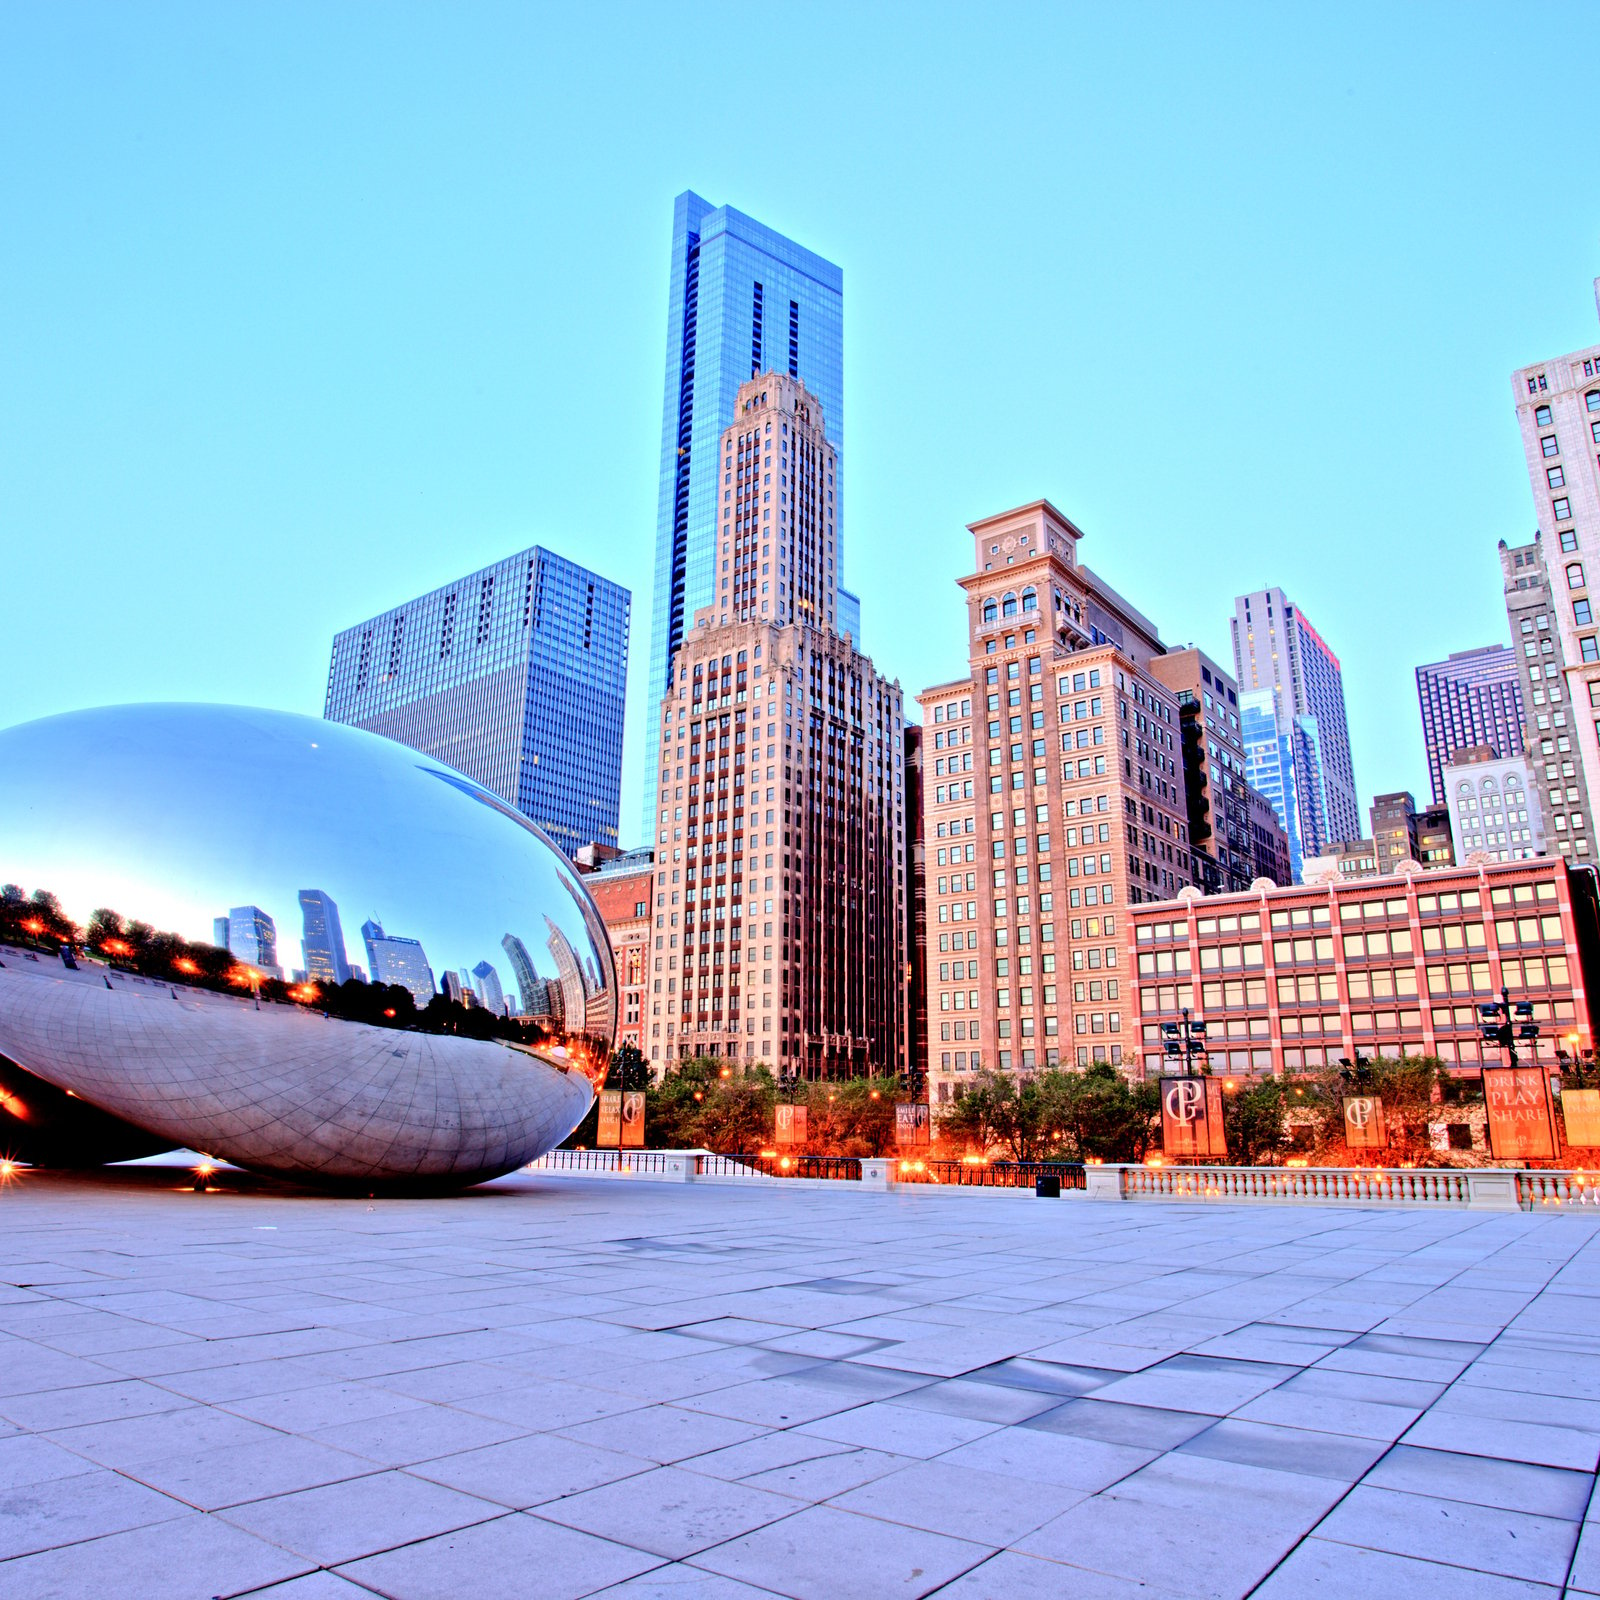 Bitcoin Classes Are All the Rage for University Students in Chicago, Illinois